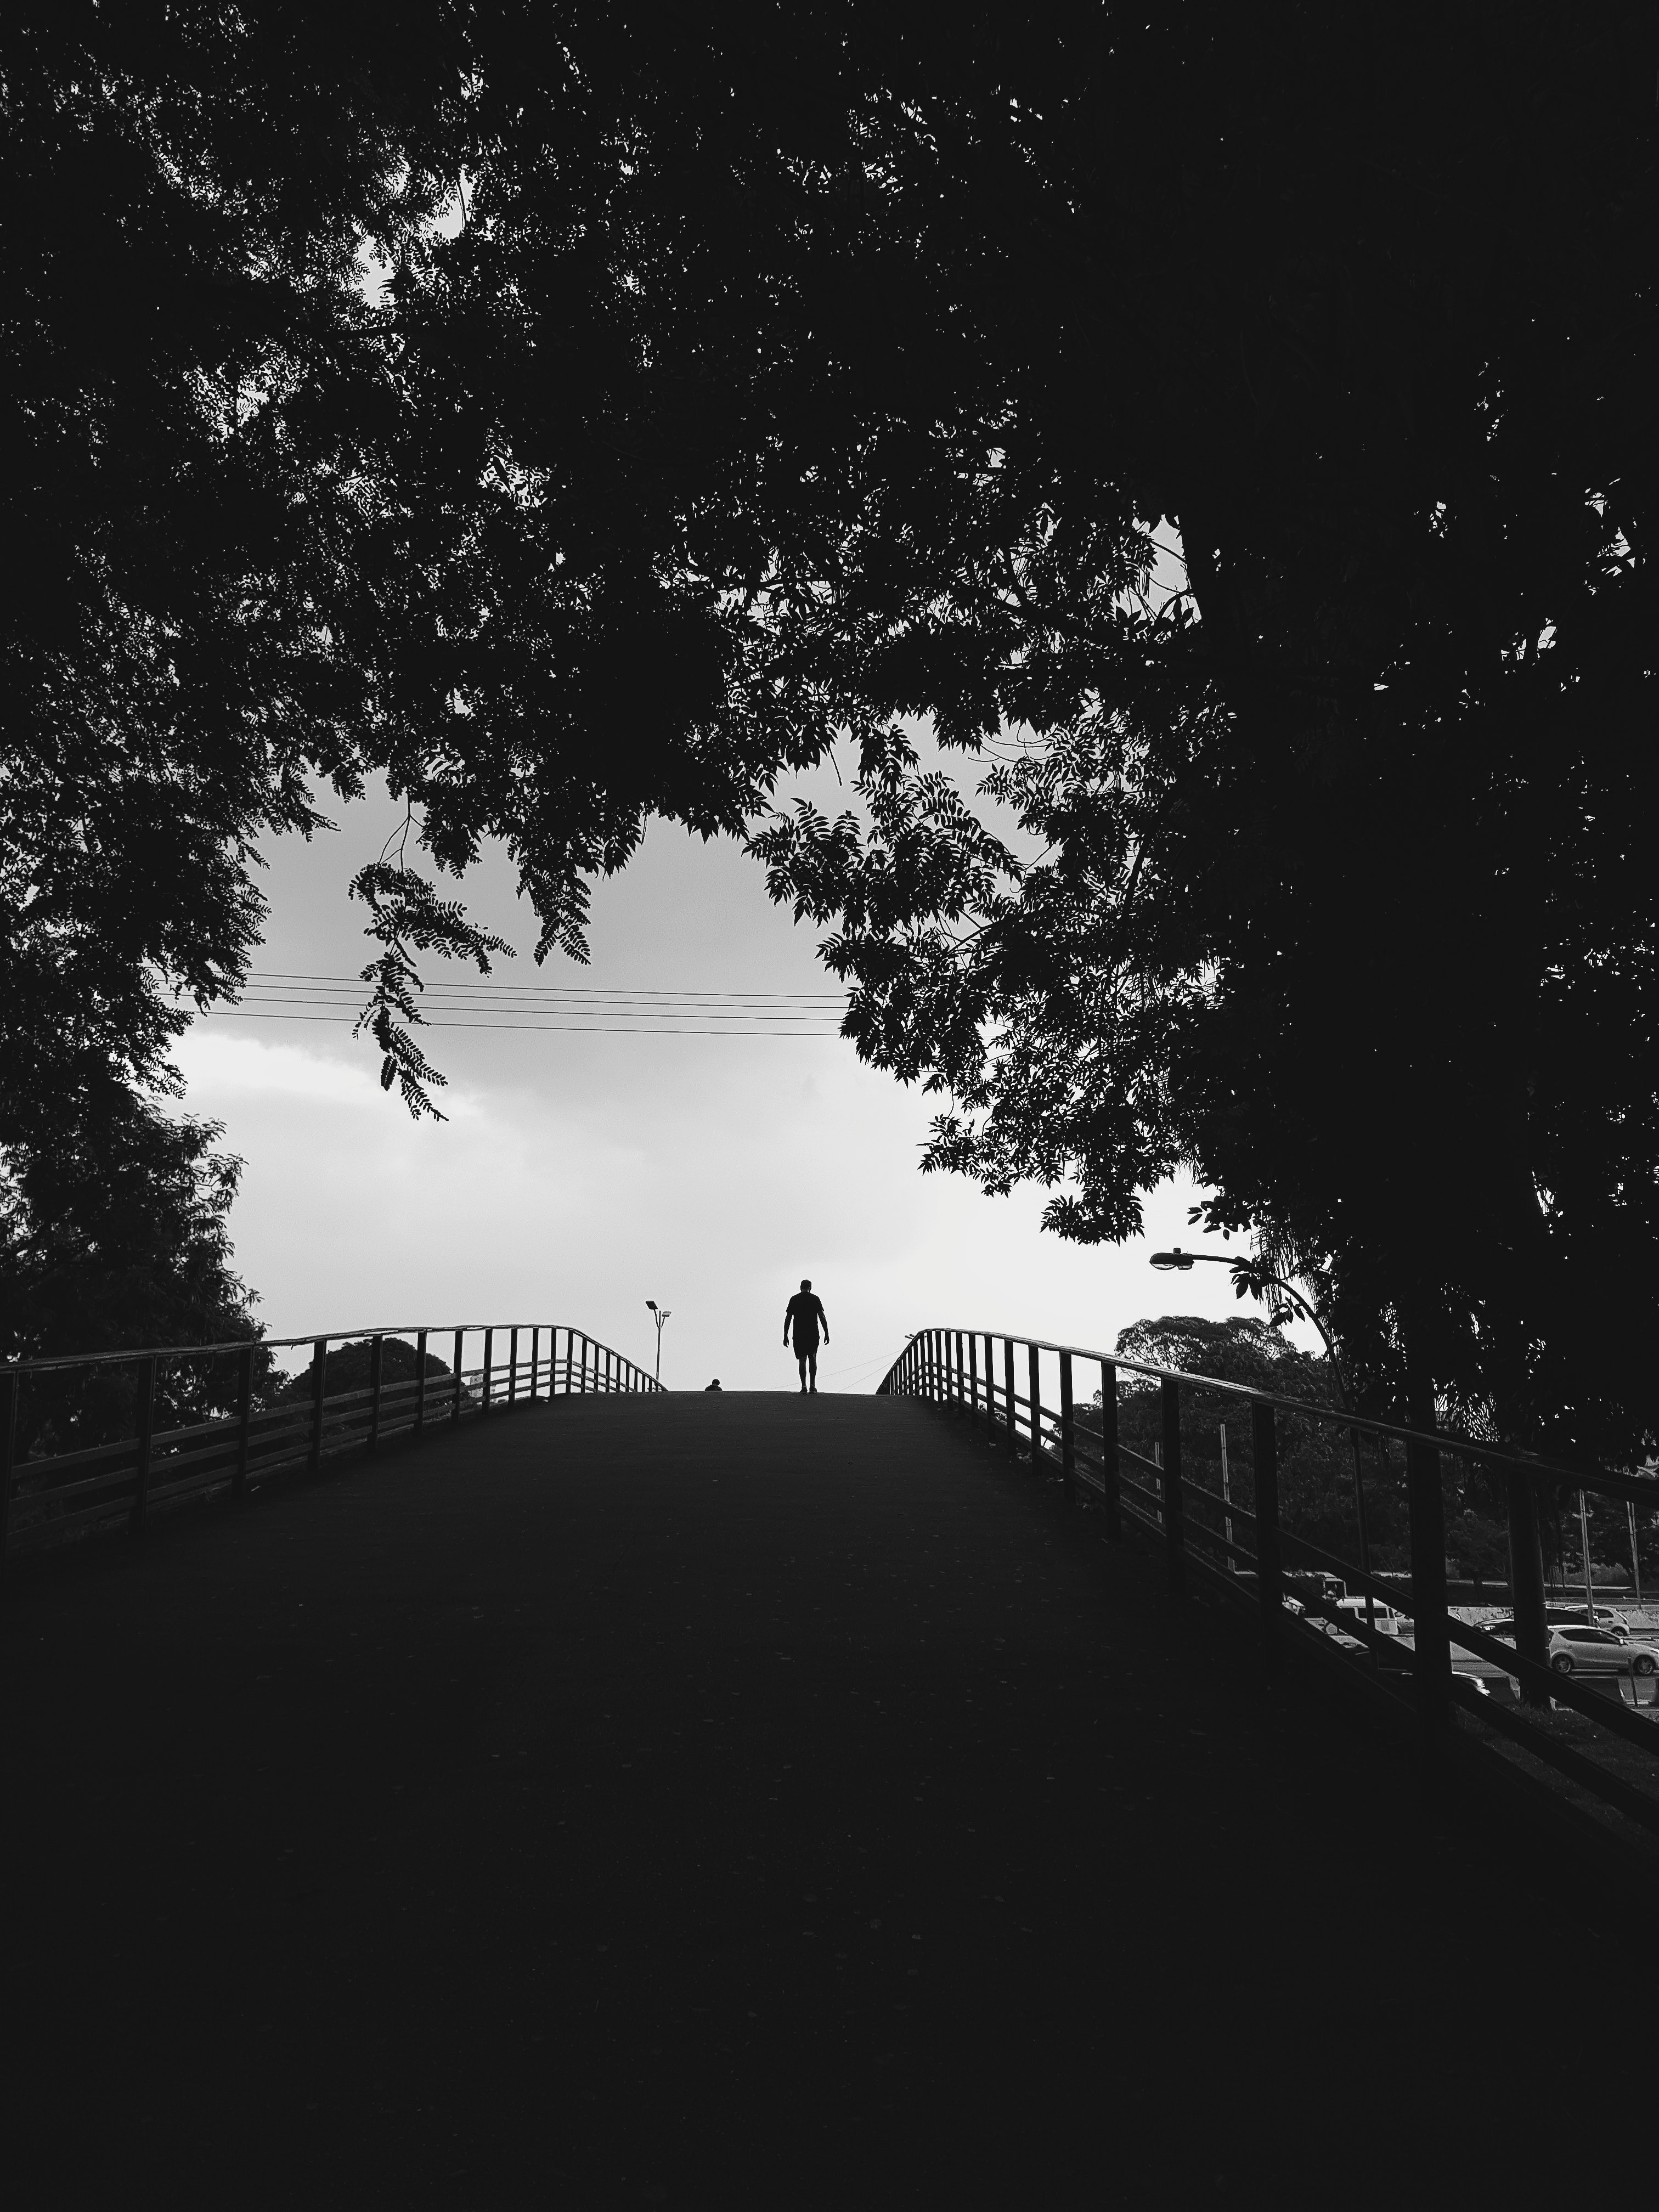 Horizontal Wallpaper alone, trees, black, silhouette, stroll, bw, chb, loneliness, lonely